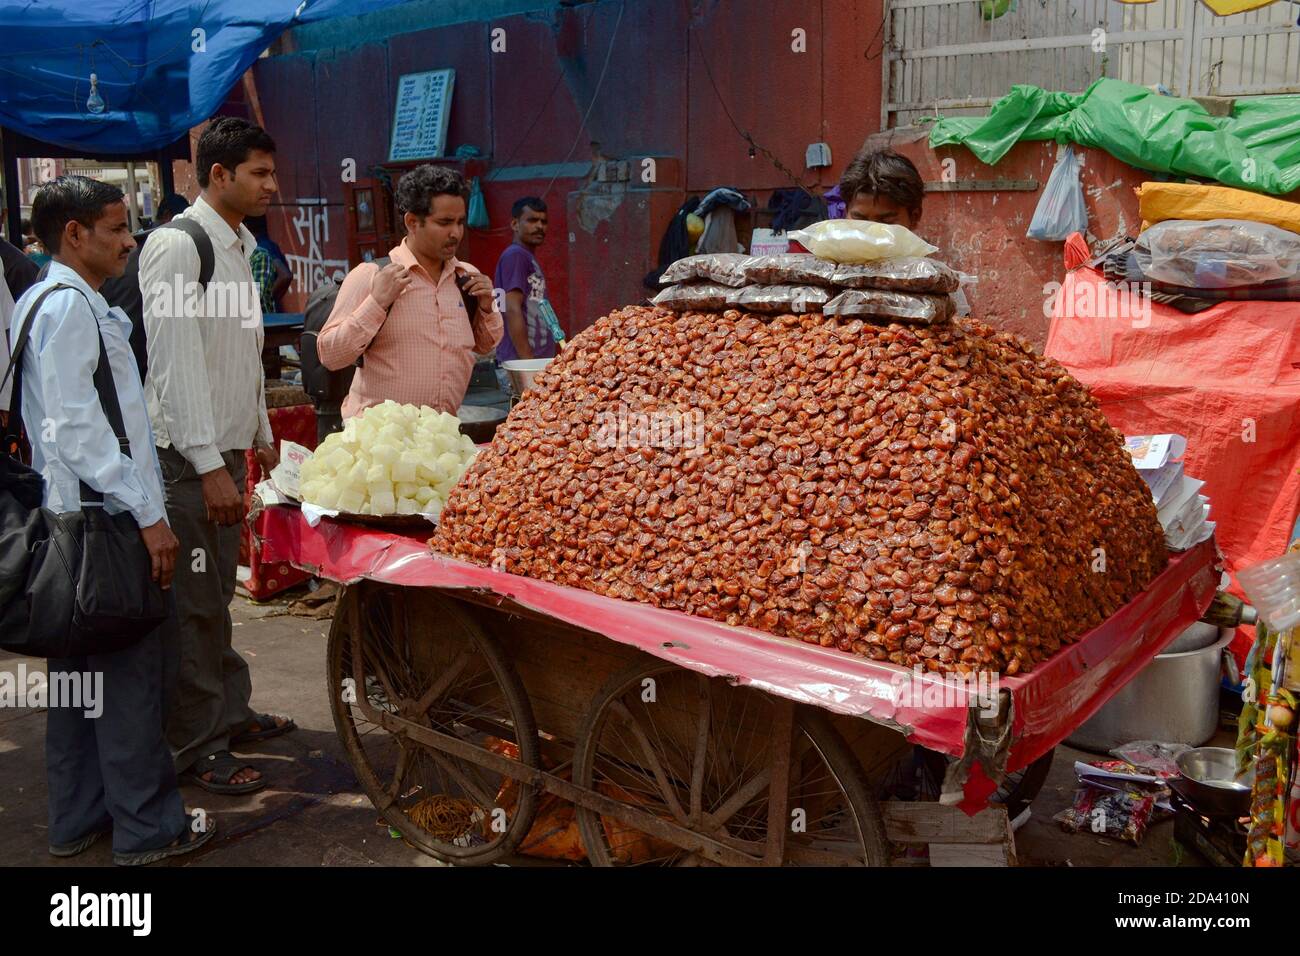 Delhi, India - April, 2014: Big heap of dry dates fruits on a wooden cart on wheels . Man selling sweet foods on the street market stall Stock Photo